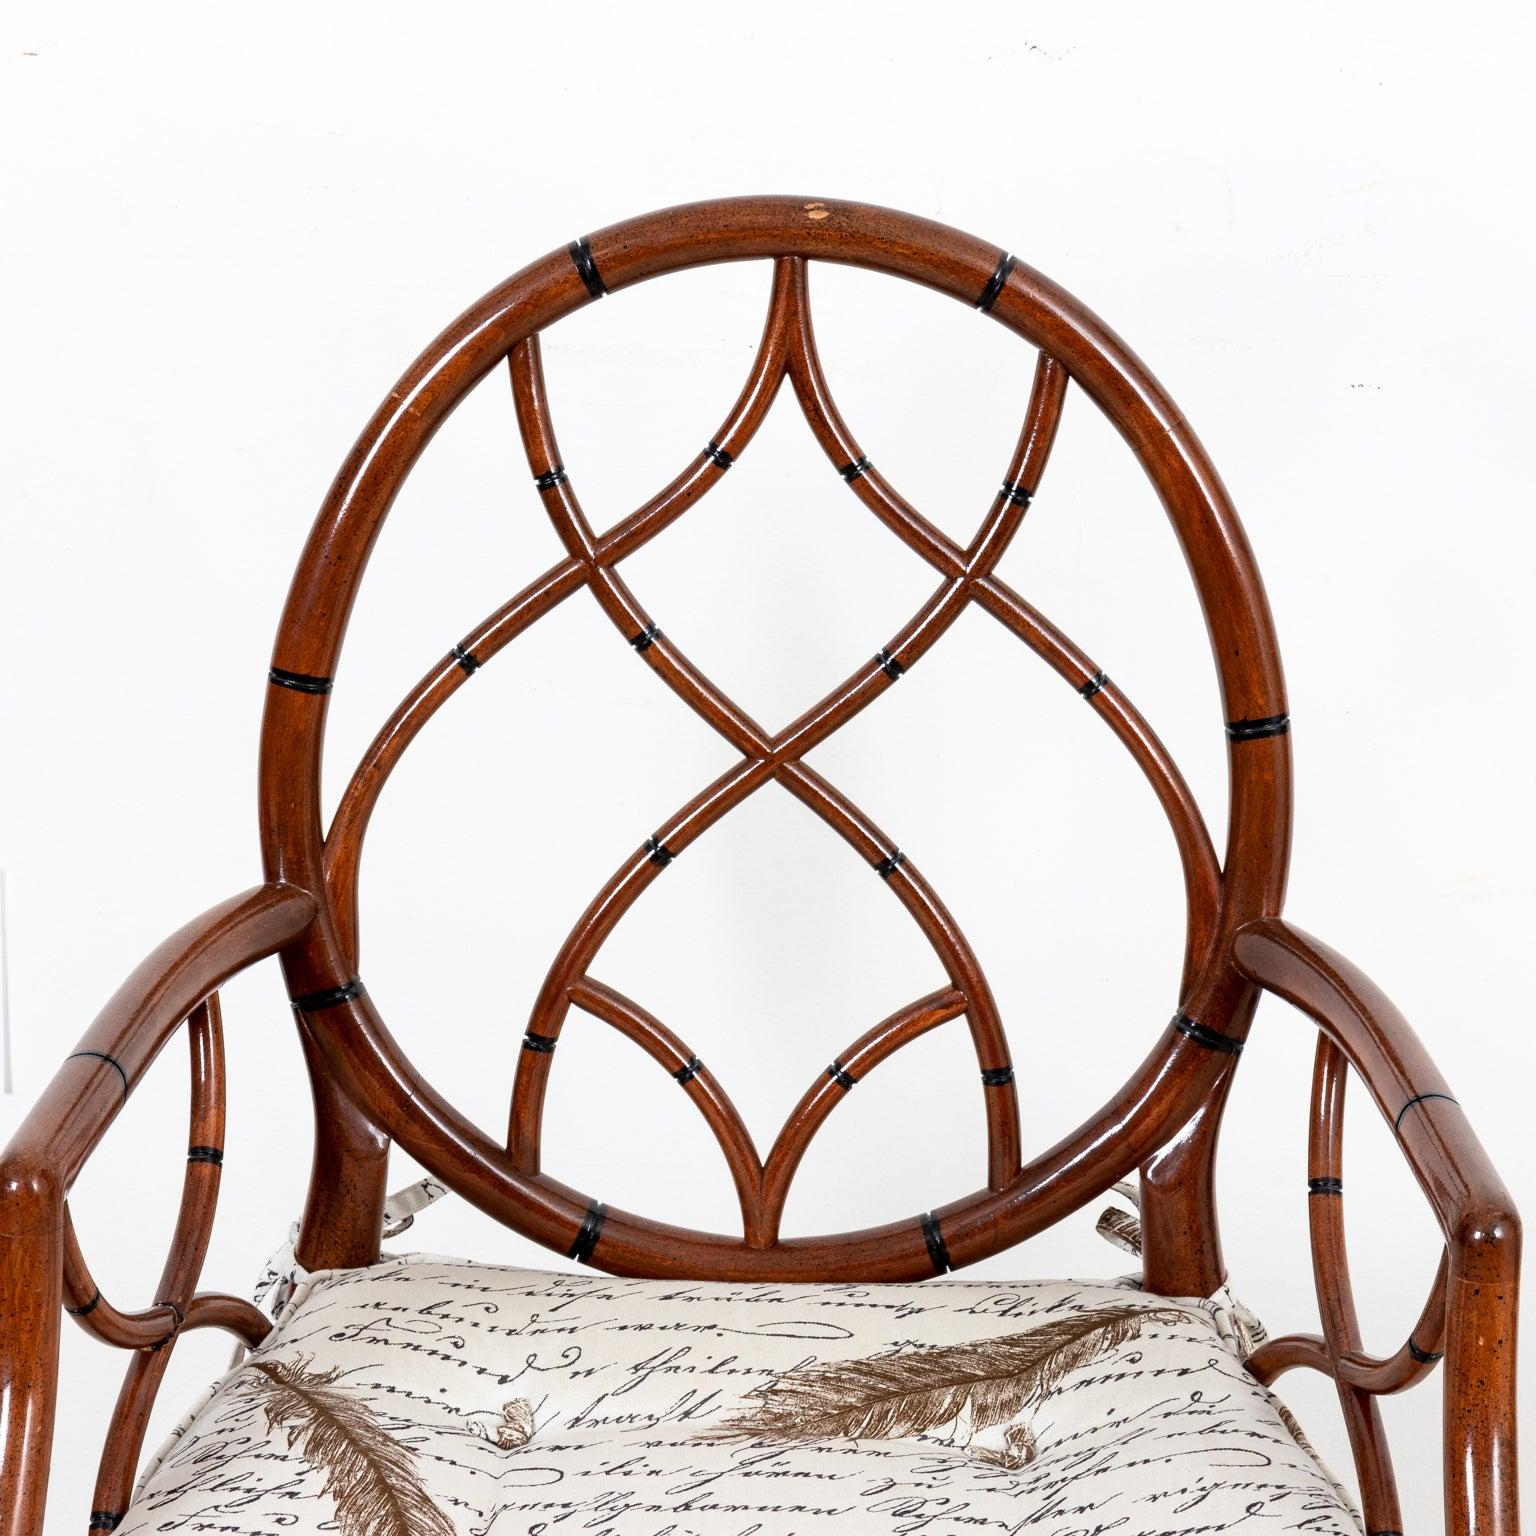 Faux bamboo painted armchair with round seat back, cane woven seat, and an upholstered cushion decorated with cursive calligraphy and feather motifs. The chair also features curved ogee shaped tracery and bottom stretchers. Please note of wear